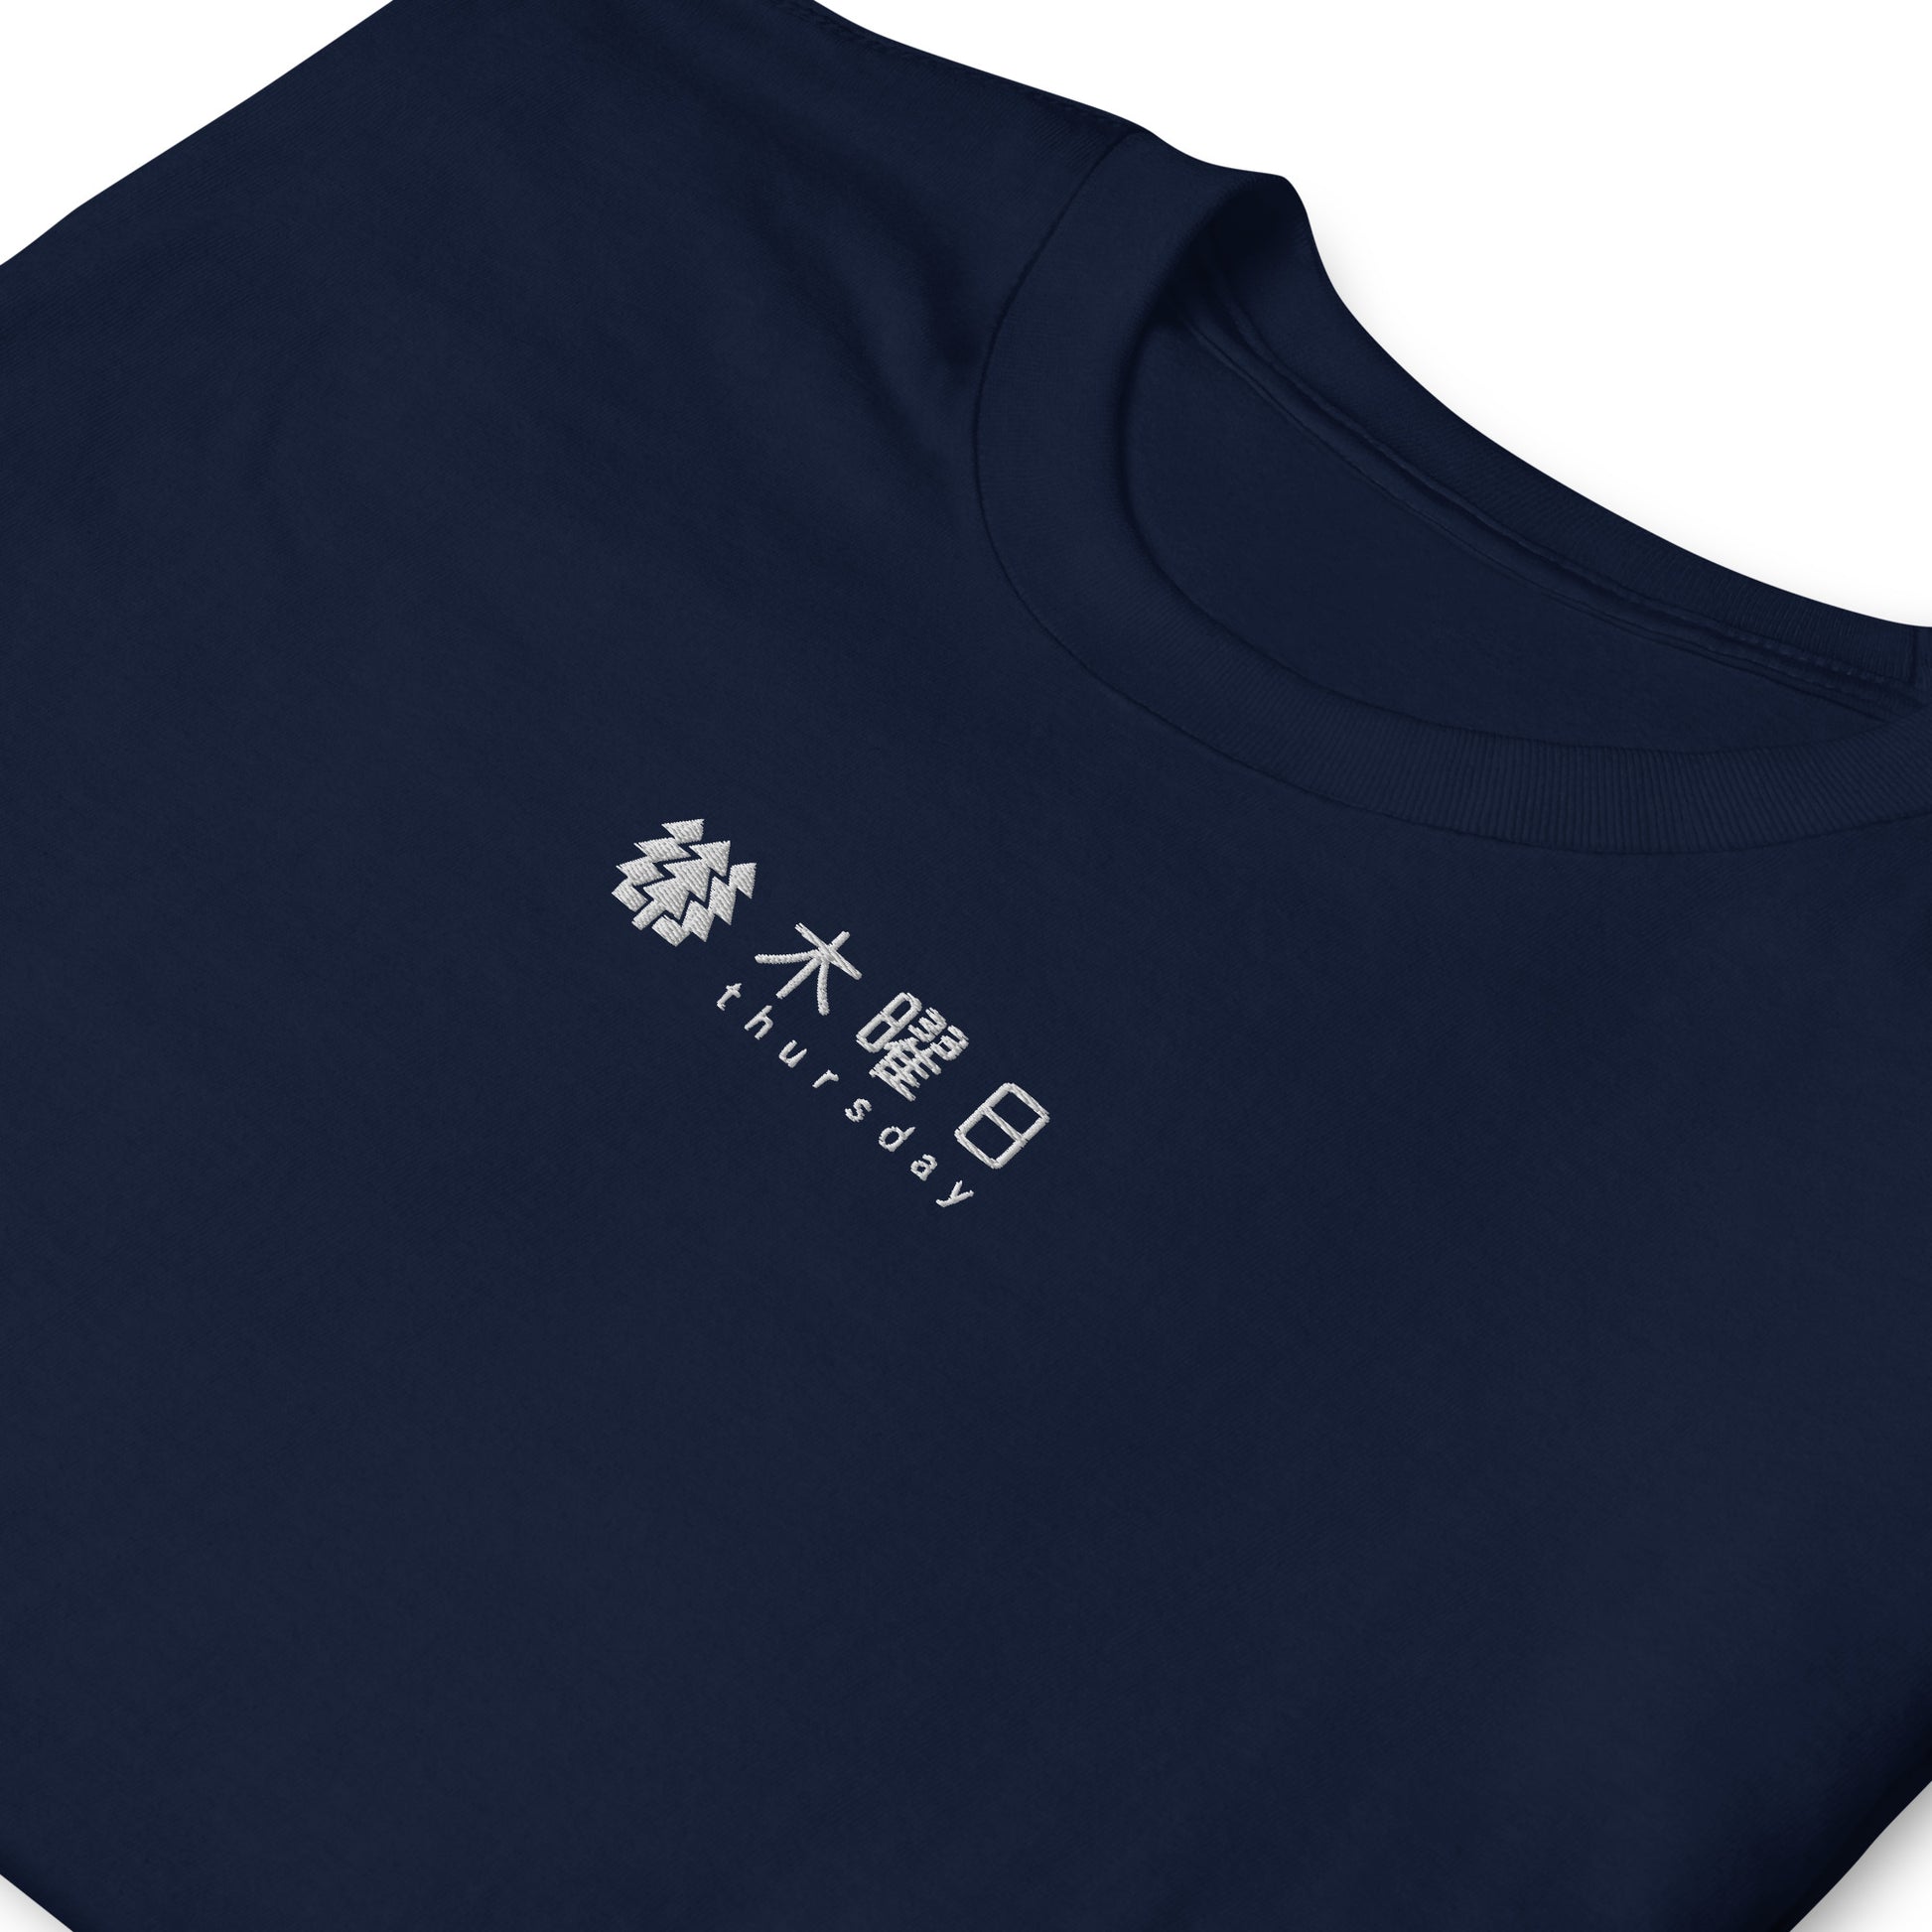 Navy High Quality Tee - Front Design with an White Embroidery "Thursday" in Japanese and English